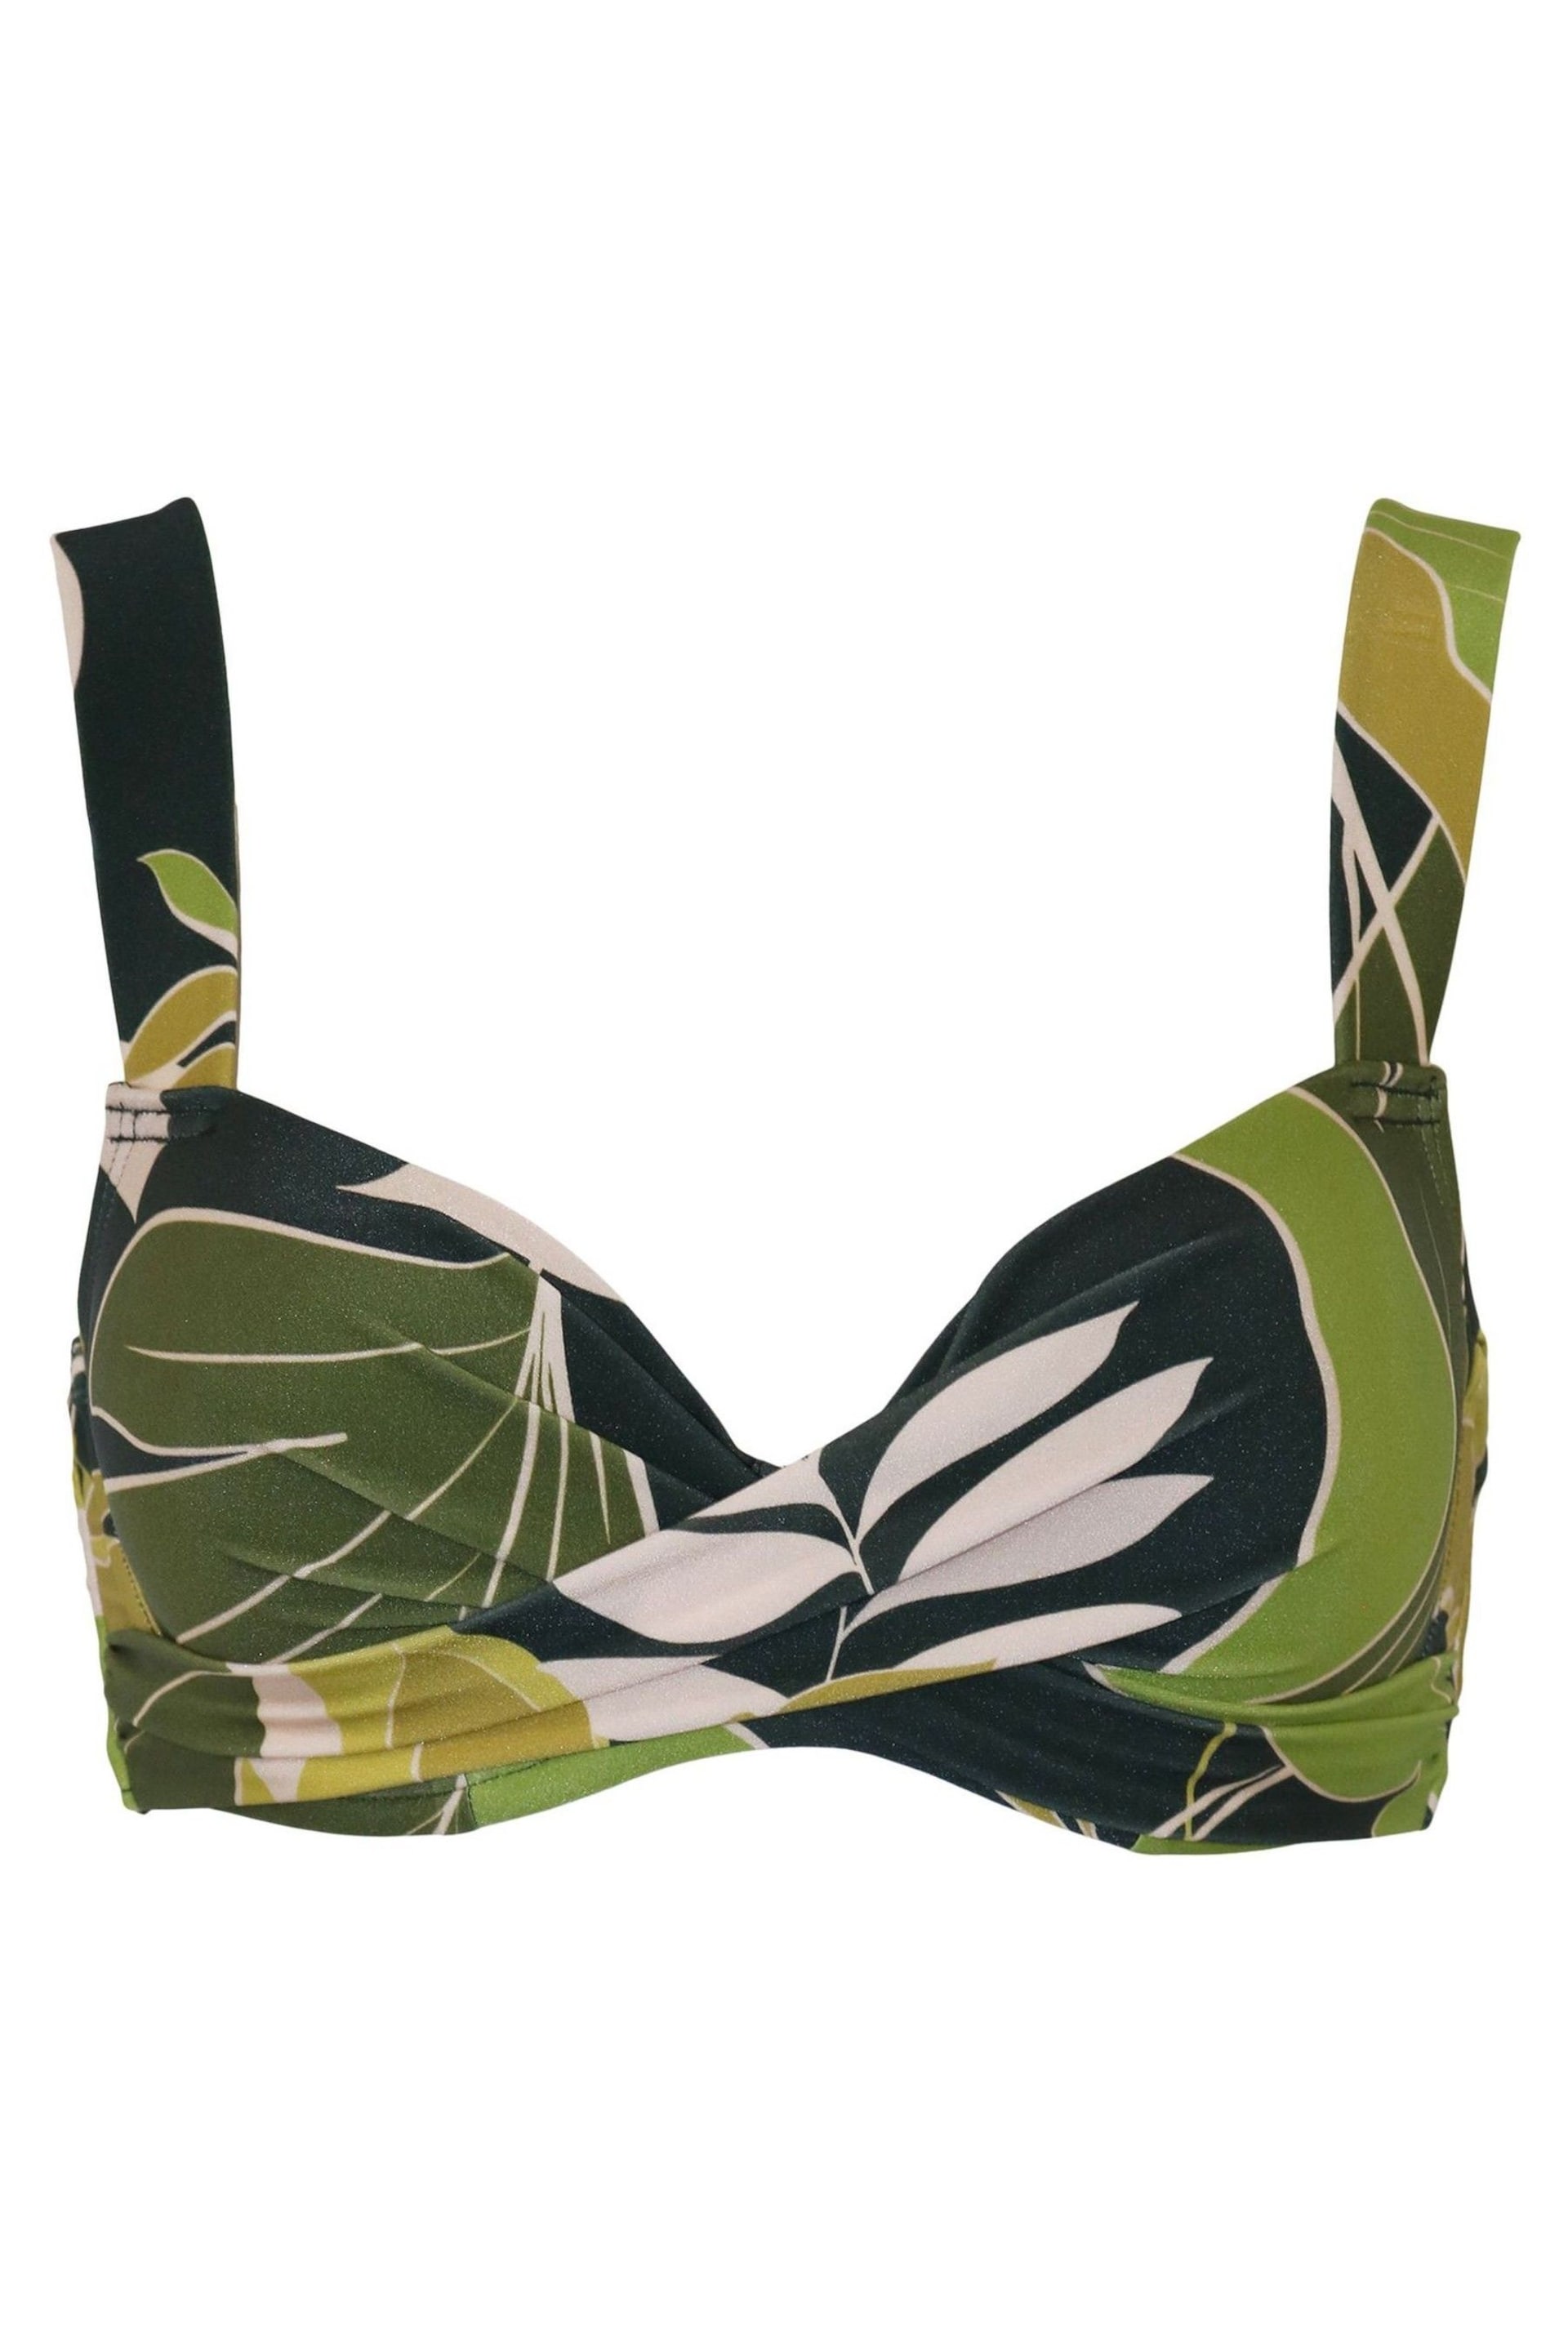 Pour Moi Green Dolce Vita Lightly Padded Twist Front Top - Image 3 of 4